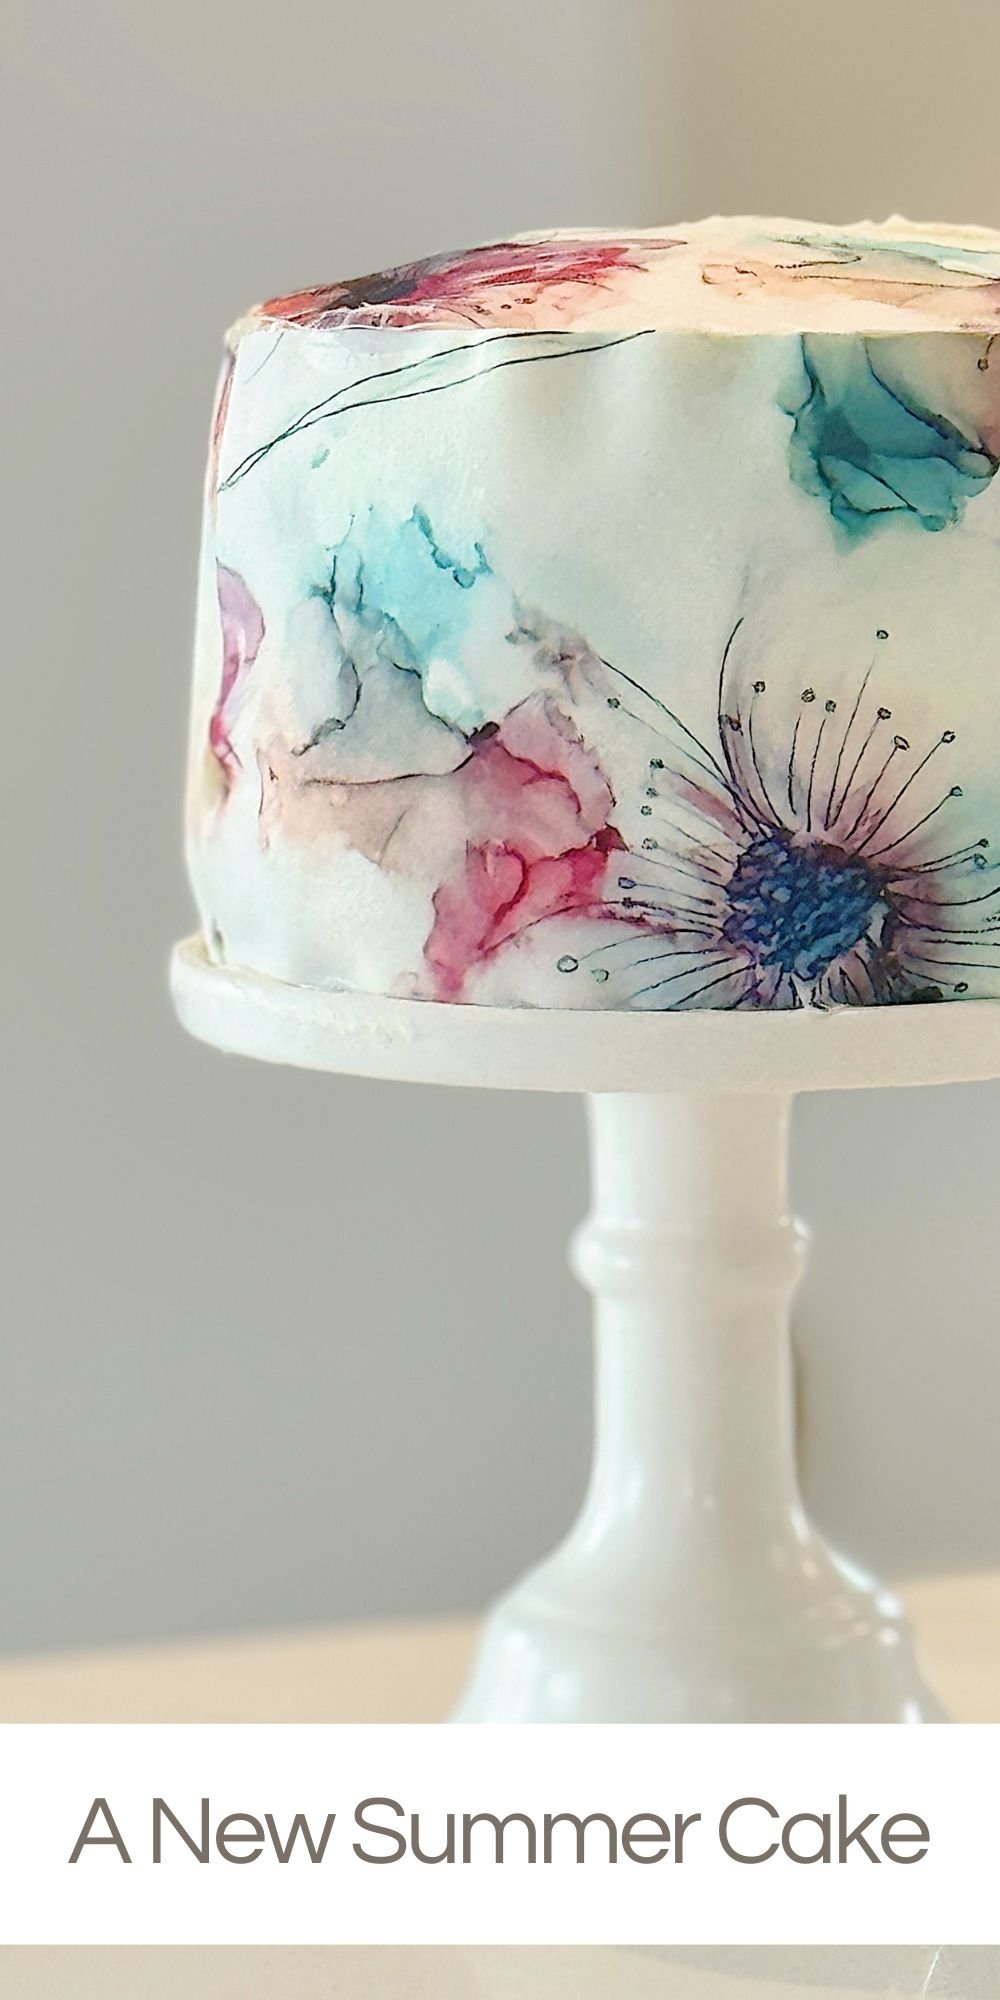 Decorating cakes with edible paper pastry sheets is a fantastic way to add intricate designs and personalized touches without needing advanced piping skills.